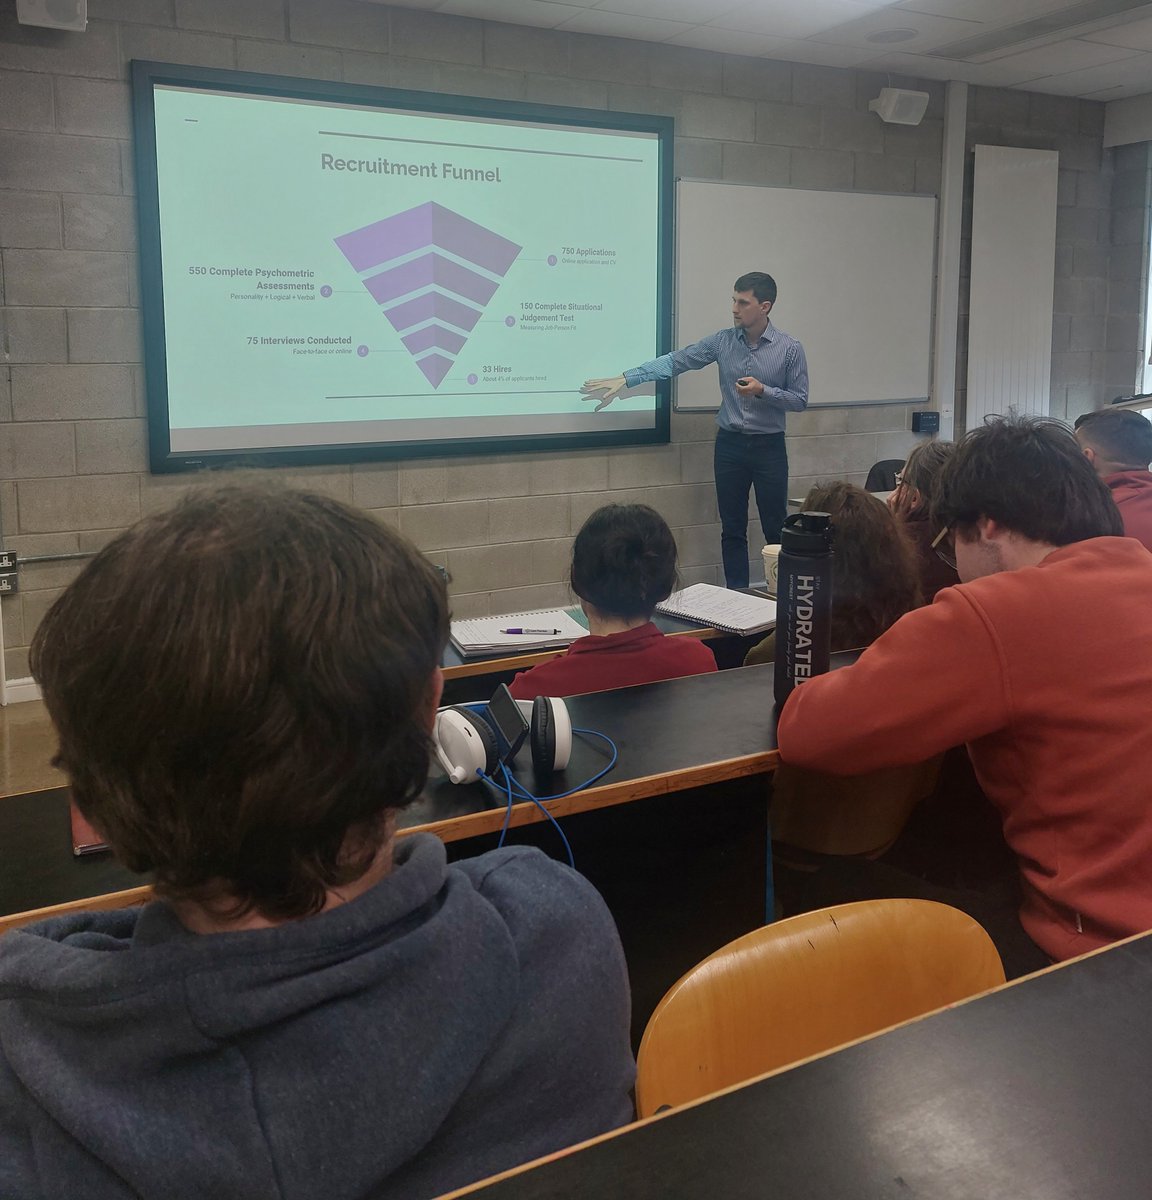 TUS Applied Psychology students at Moylish Campus hearing from a guest speaker today about their experience applying psychology and psychometrics in the workplace. A great session learning about psychology in practice! @TUS_ie @lisascottpsych